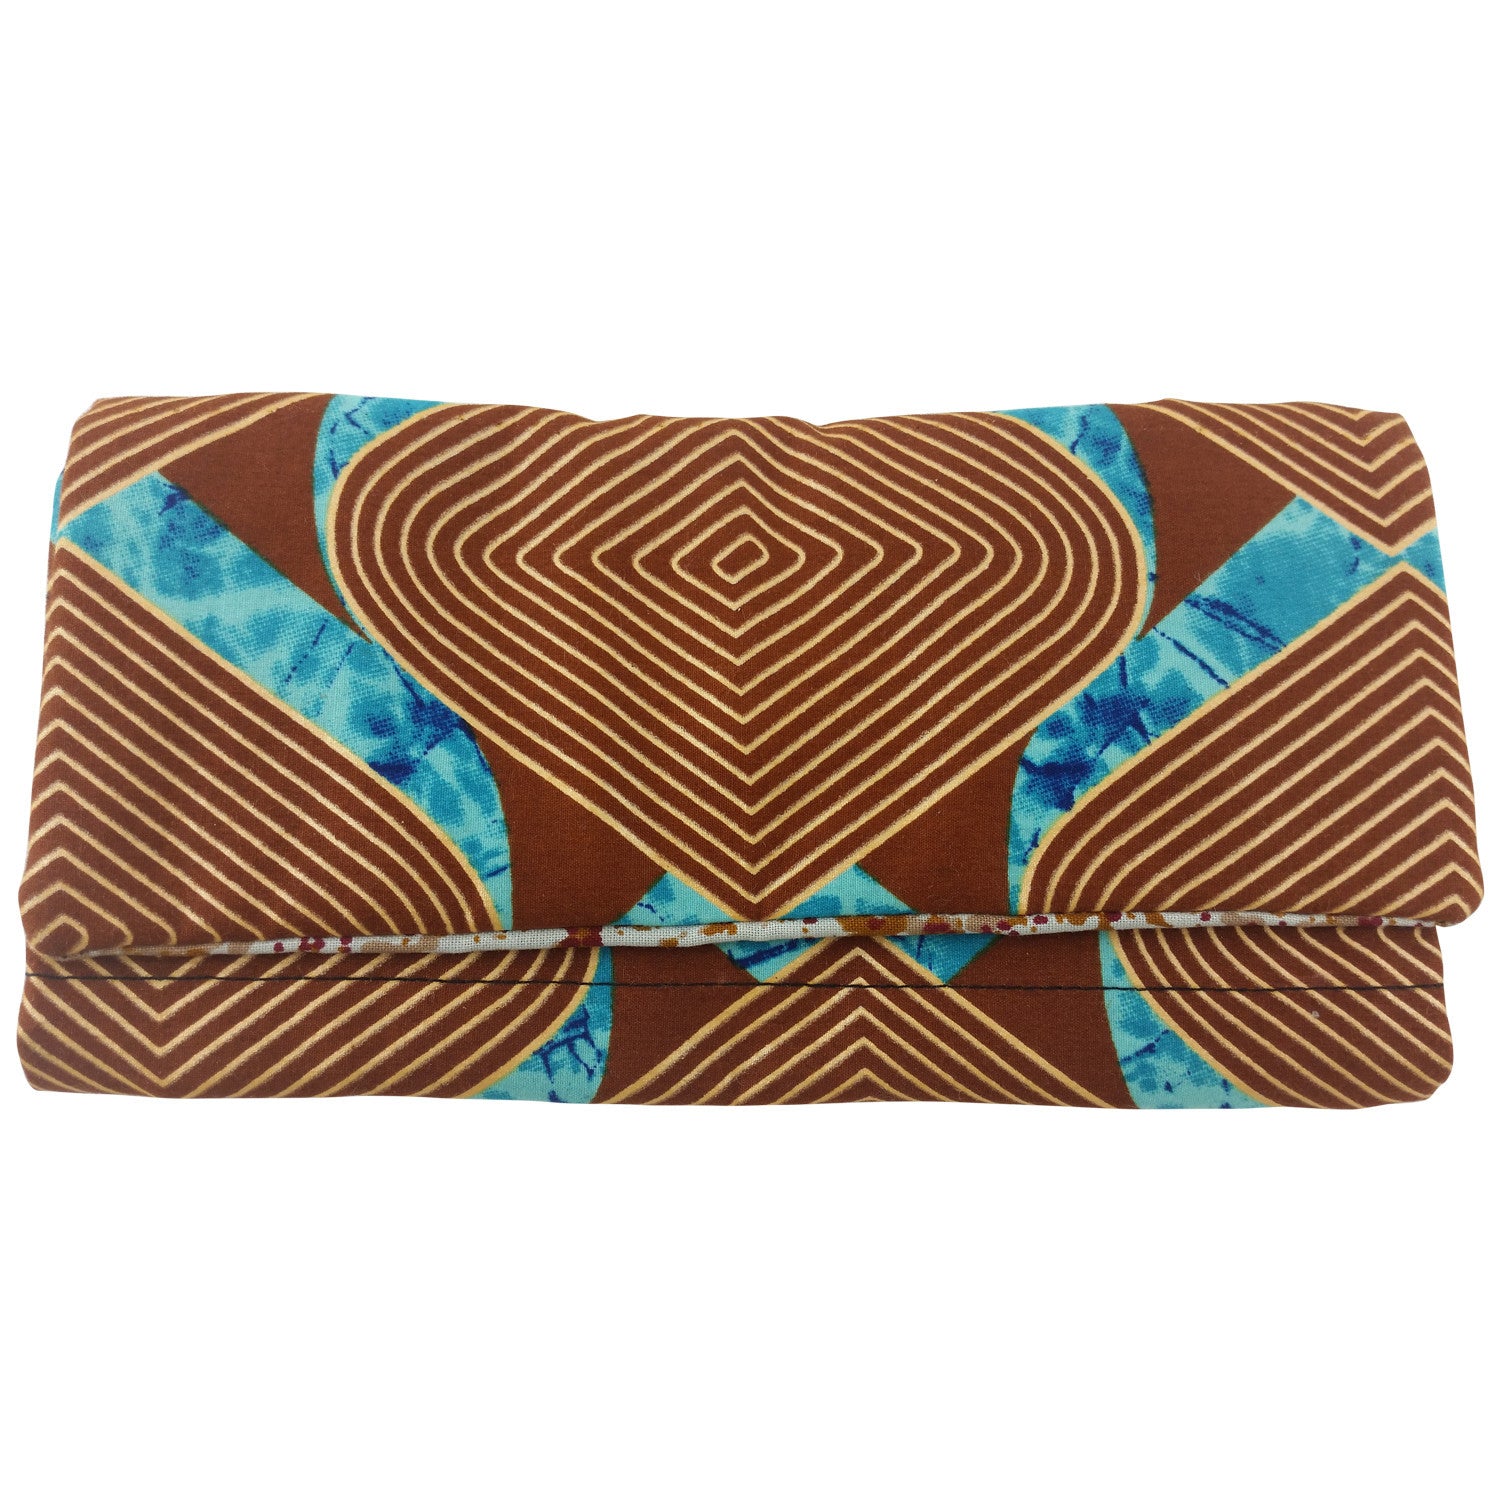 1 of 4: East African Kitenge Fabric Women's Wallet (Brown, Beige and Blue)